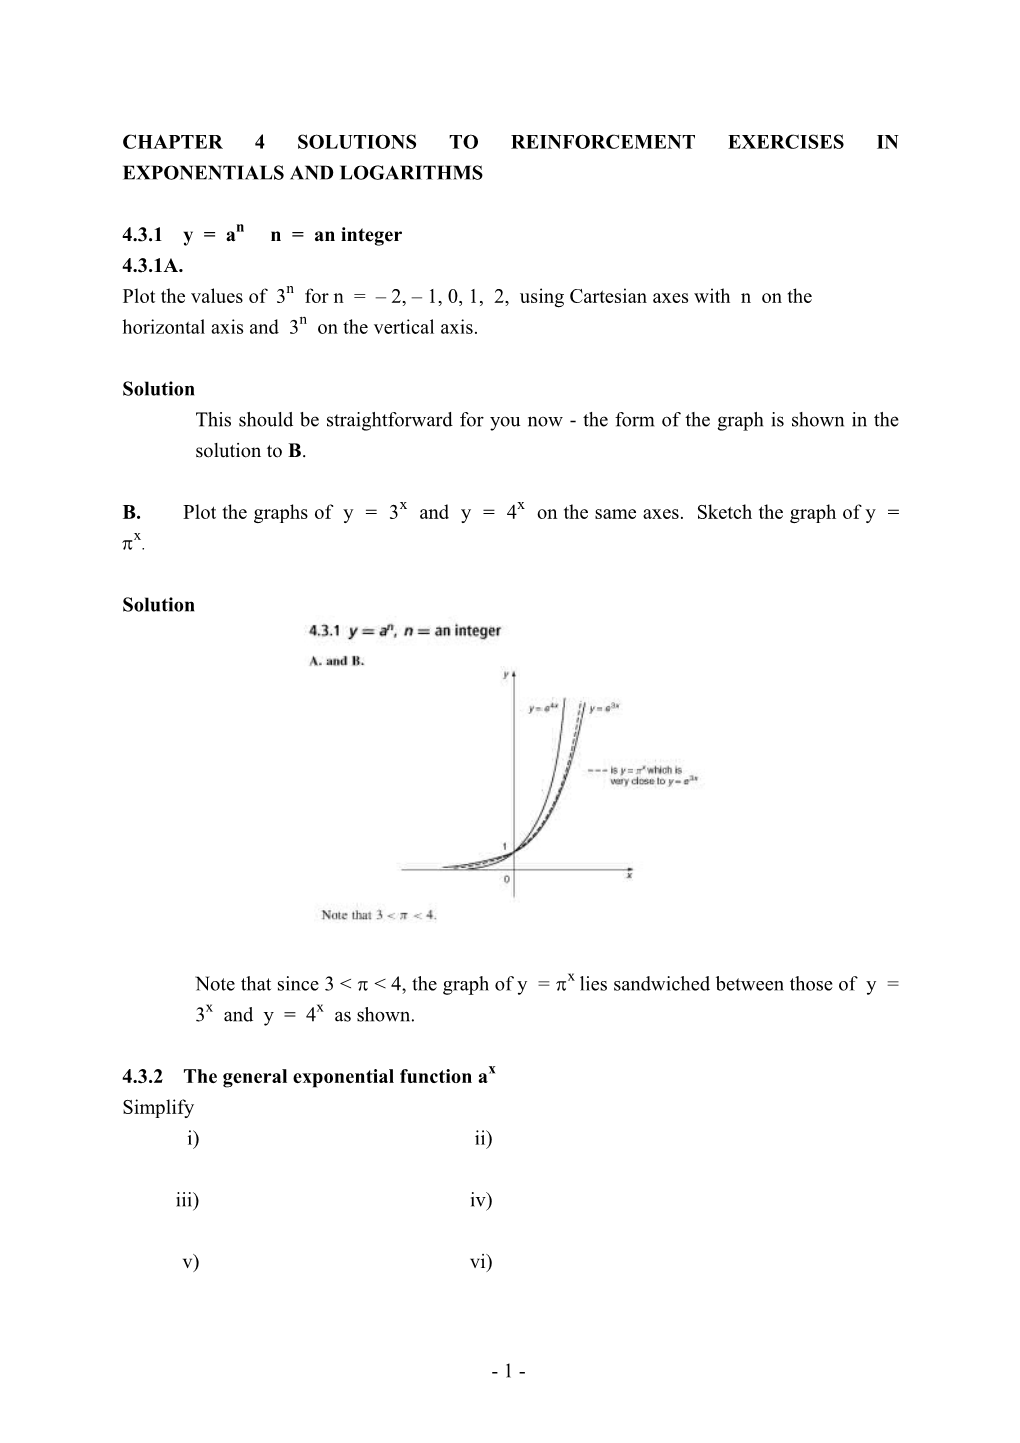 Chapter 4 Solutions to Reinforcement Exercises in Exponentials and Logarithms